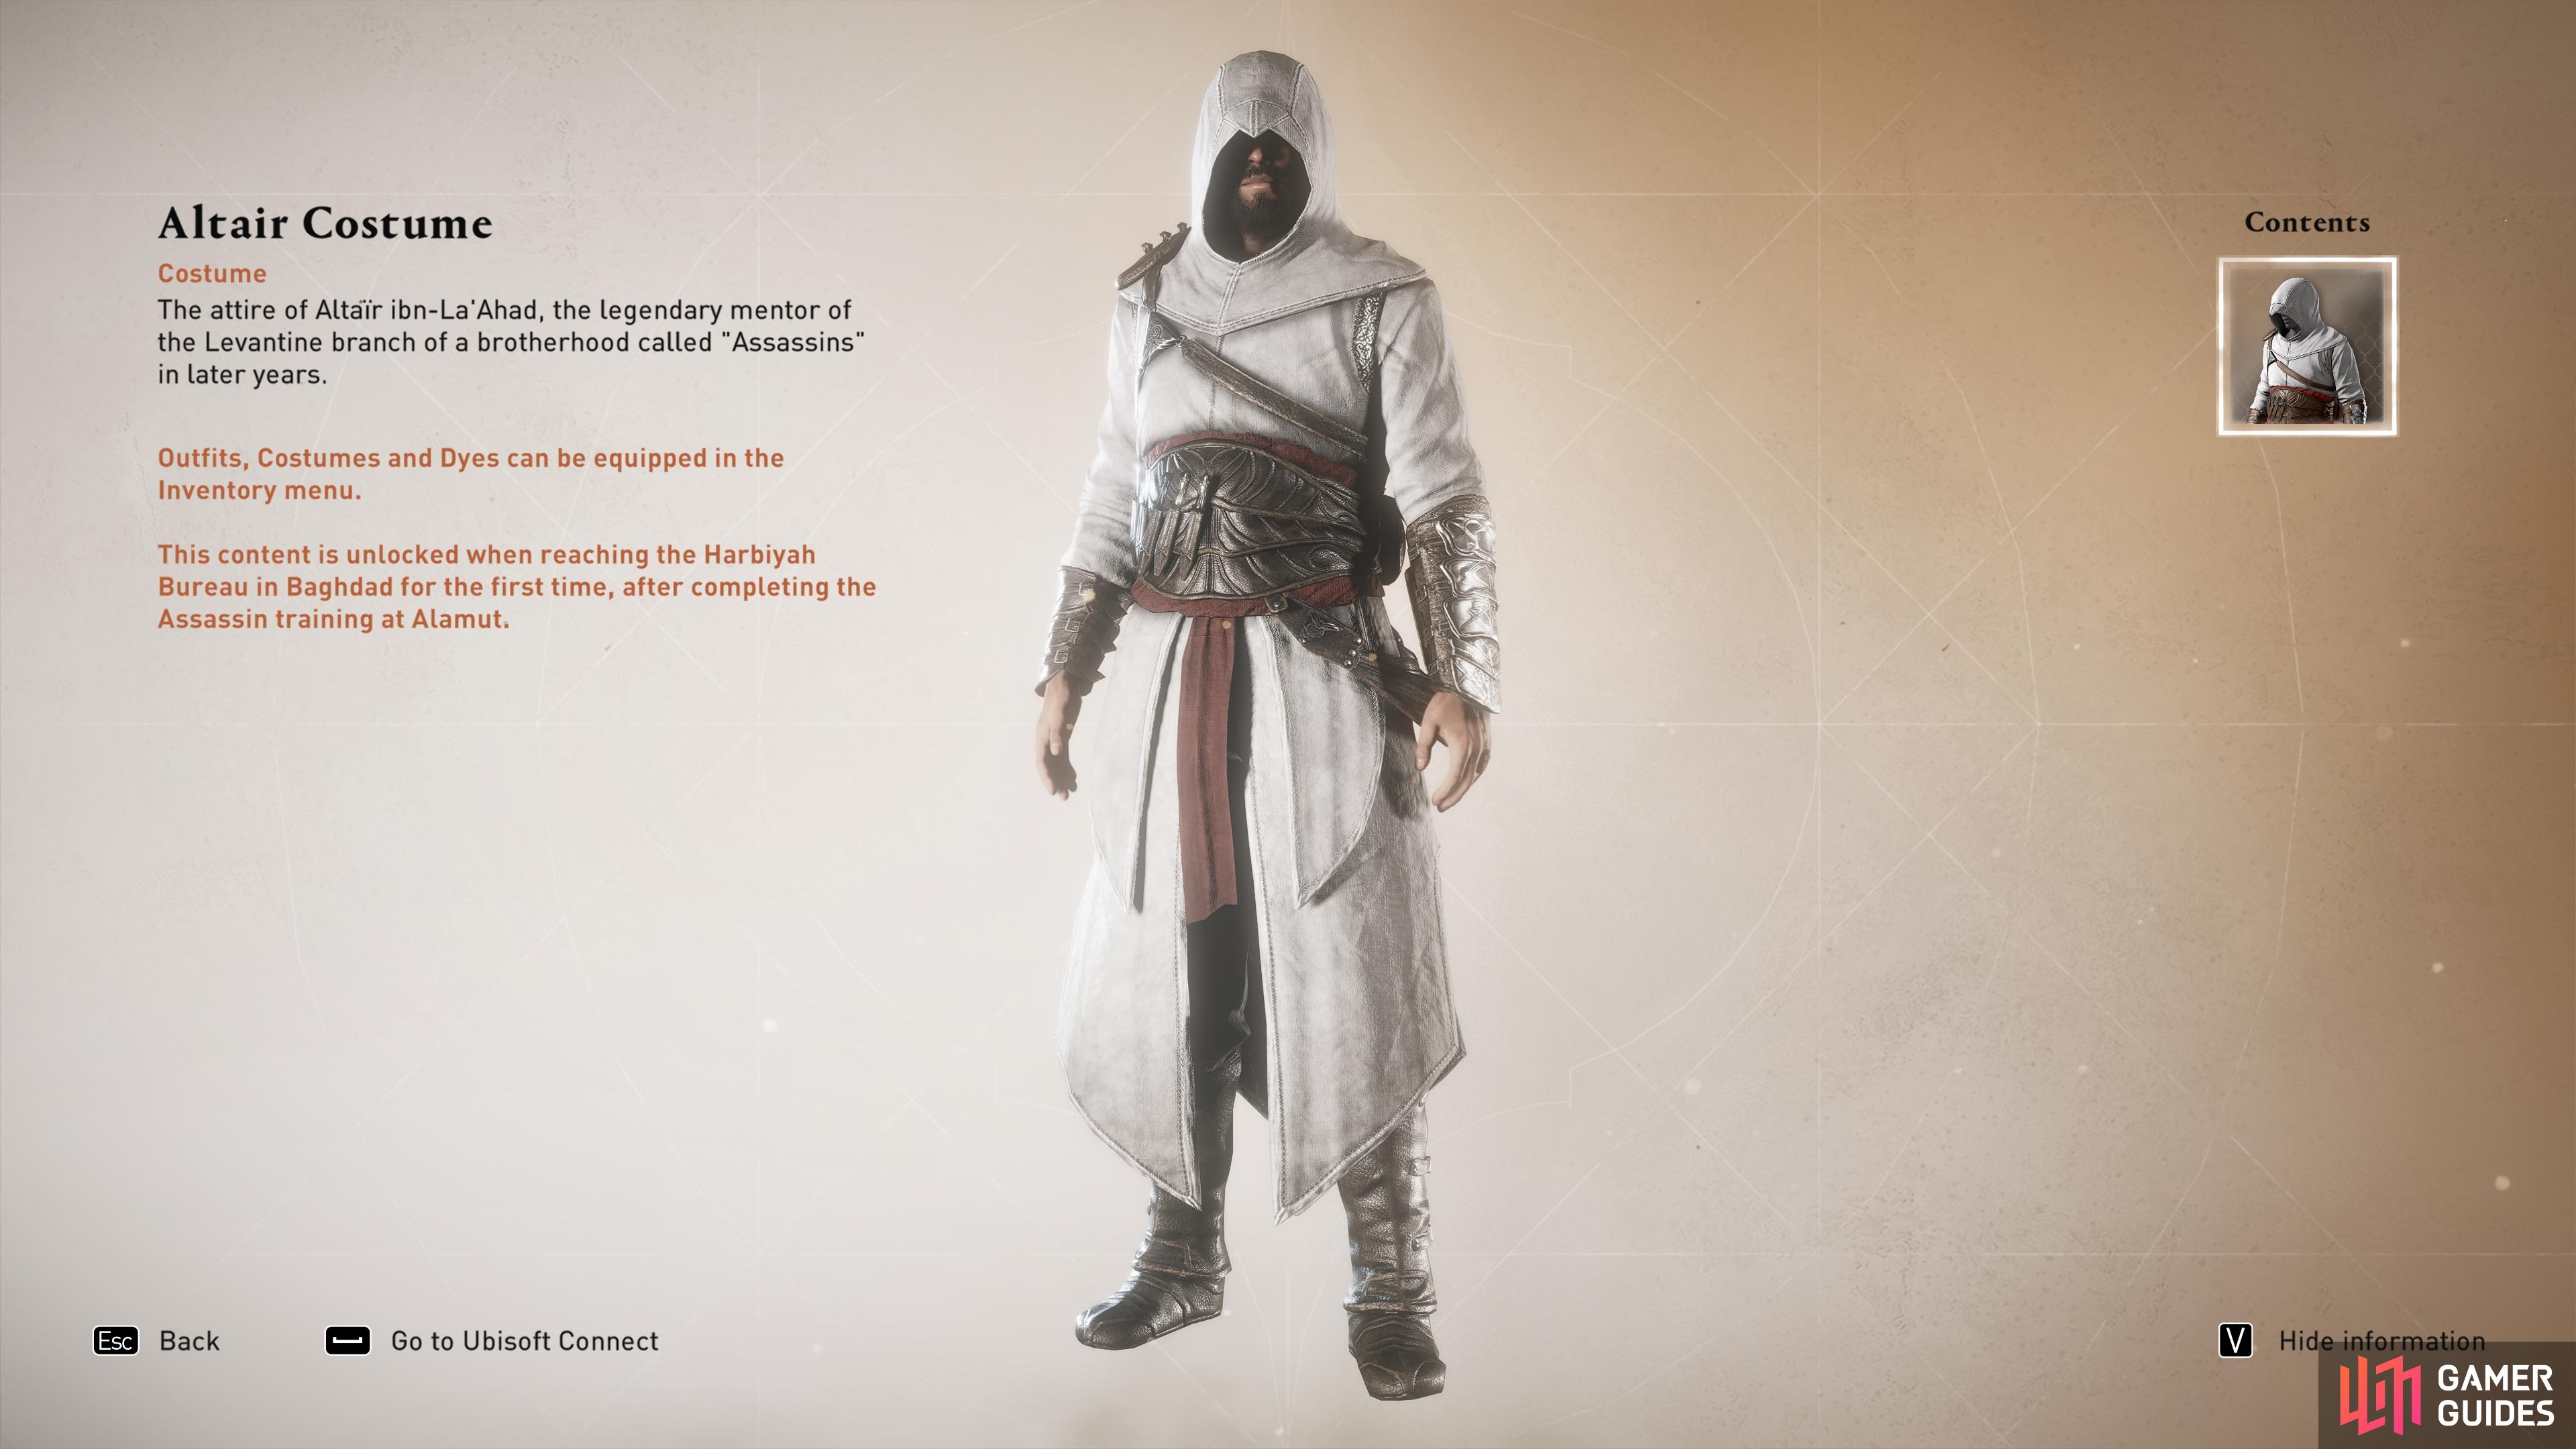 The Altair legacy costume that you can use in Assassin’s Creed Mirage.